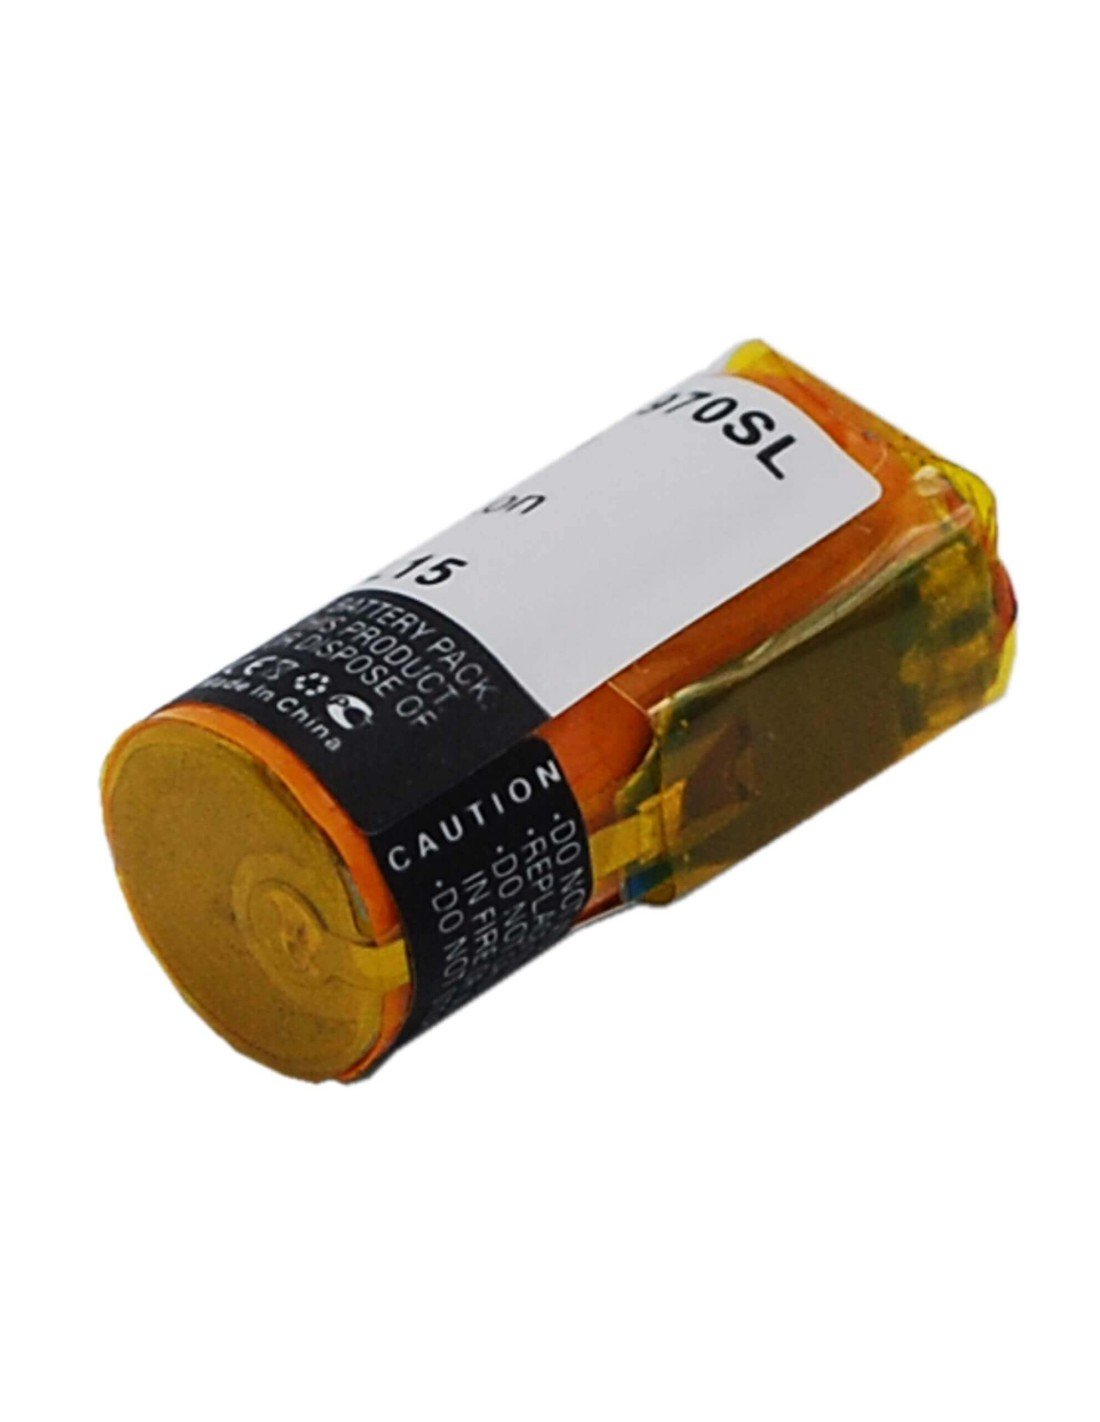 Battery for Sony Hbh-ds970 3.7V, 120mAh - 0.44Wh